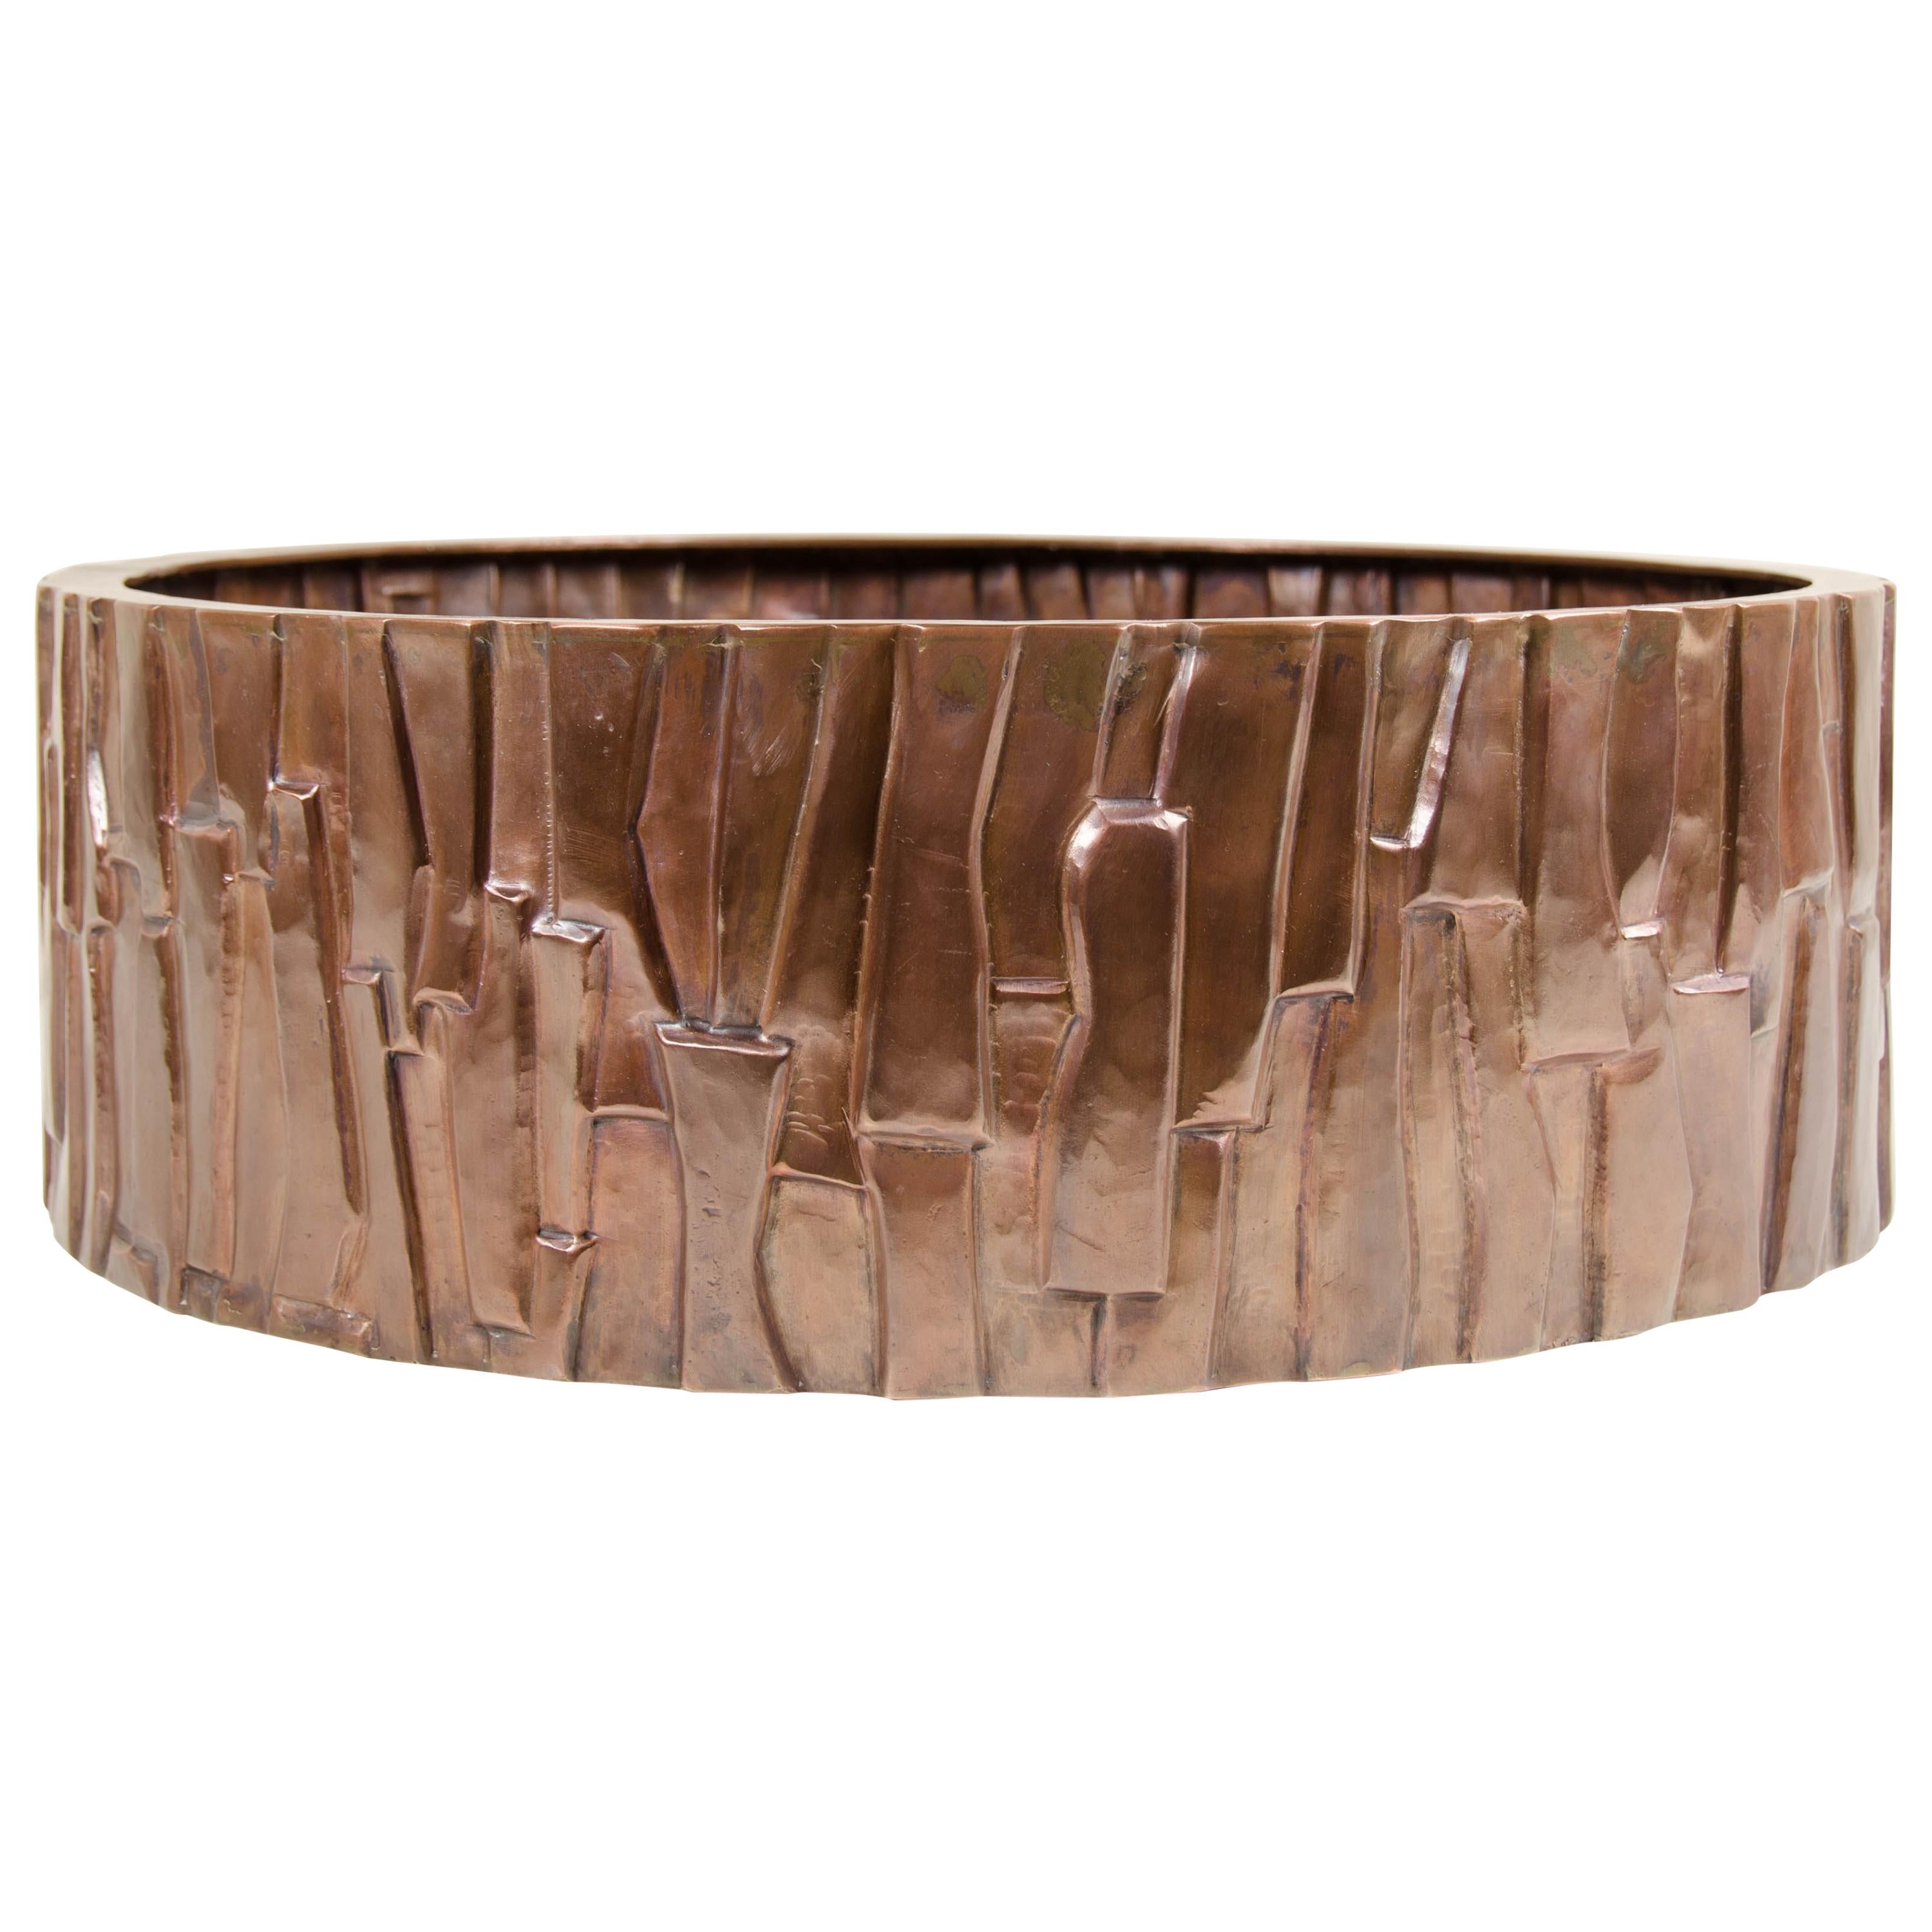 Kuai Design Low Cachepot, Copper by Robert Kuo, Hand Repoussé, Limited Edition